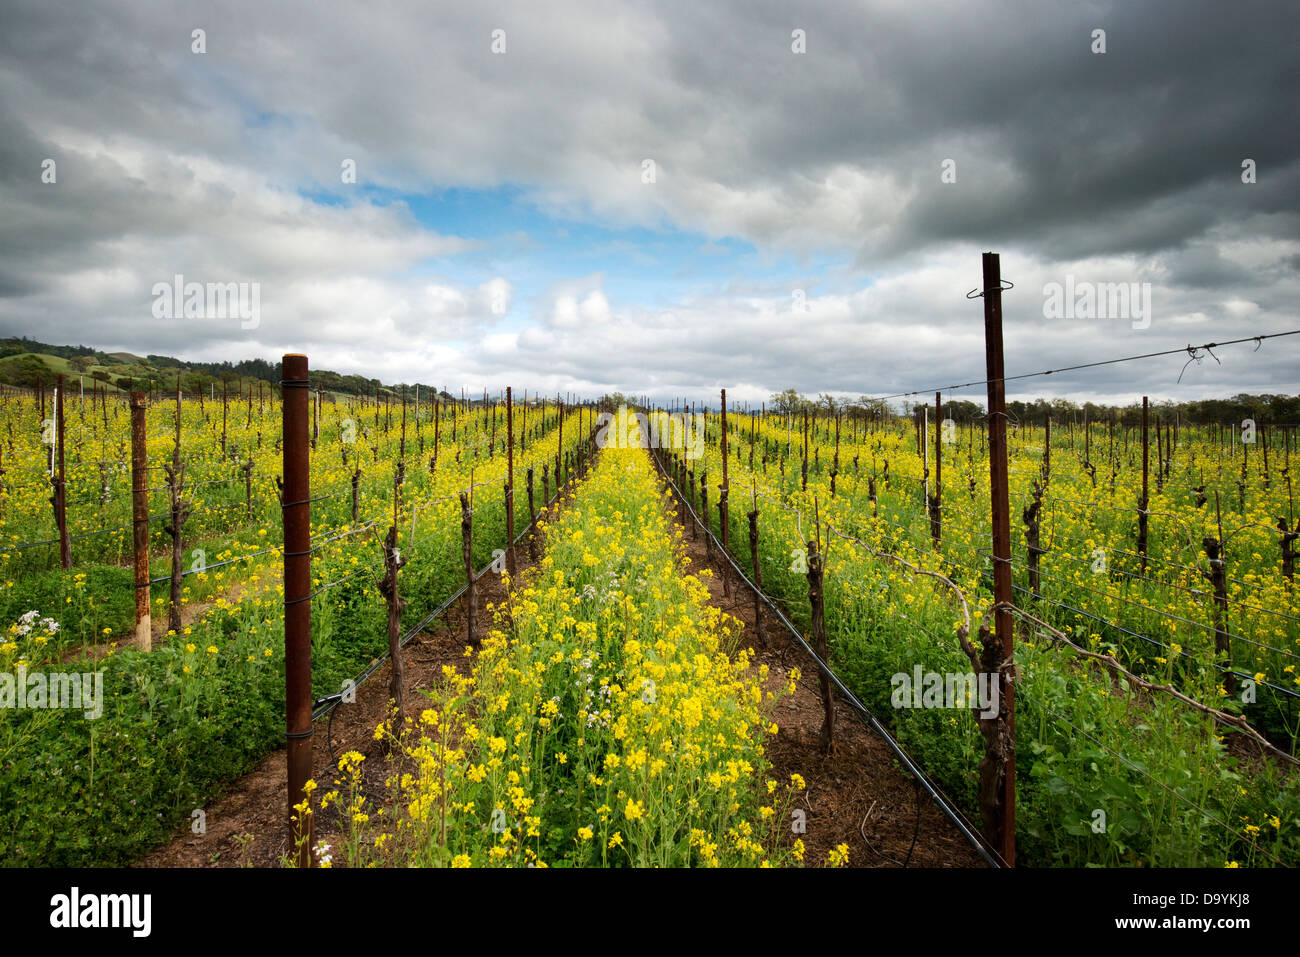 Mustard flowers engulf a vineyard in the Alexander Valley appellation of the Sonoma Wine Country in the Spring near Healdsburg, Stock Photo